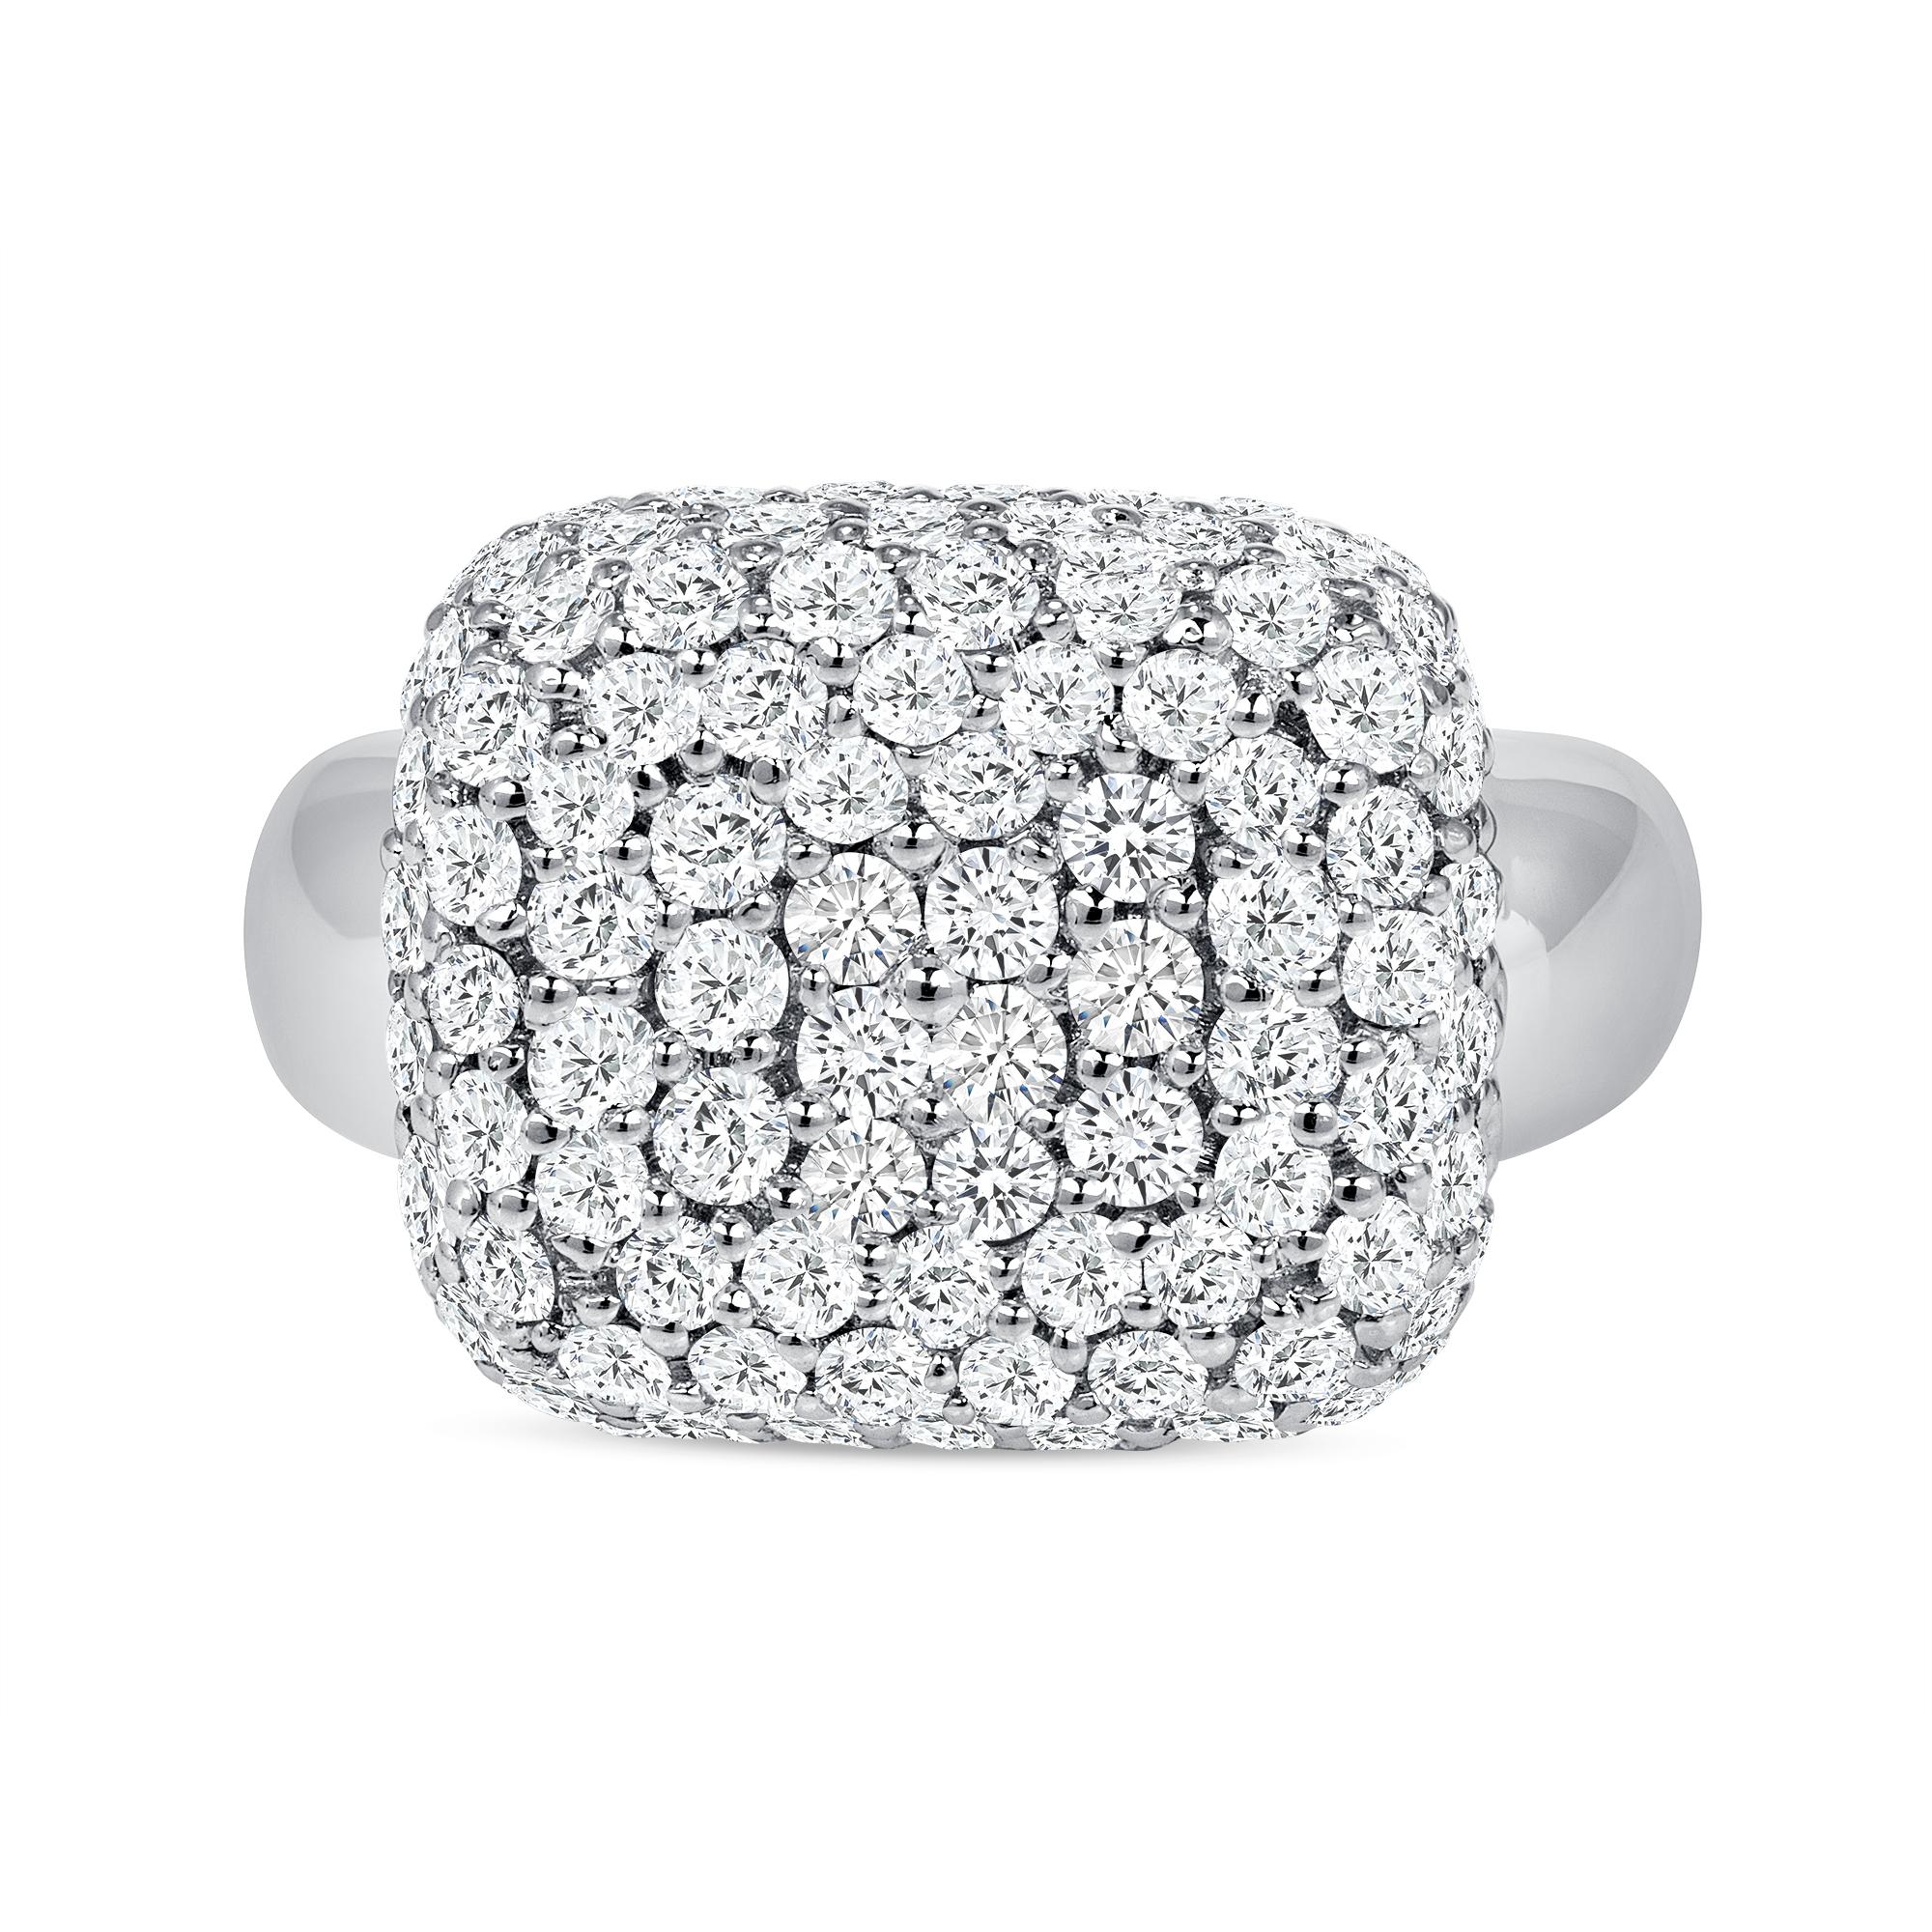 18K White Gold 1.60 Carat Genuine Diamonds 
Quality of Diamond: G Color VS Quality 
Total Gold Weight: 18.7 Grams